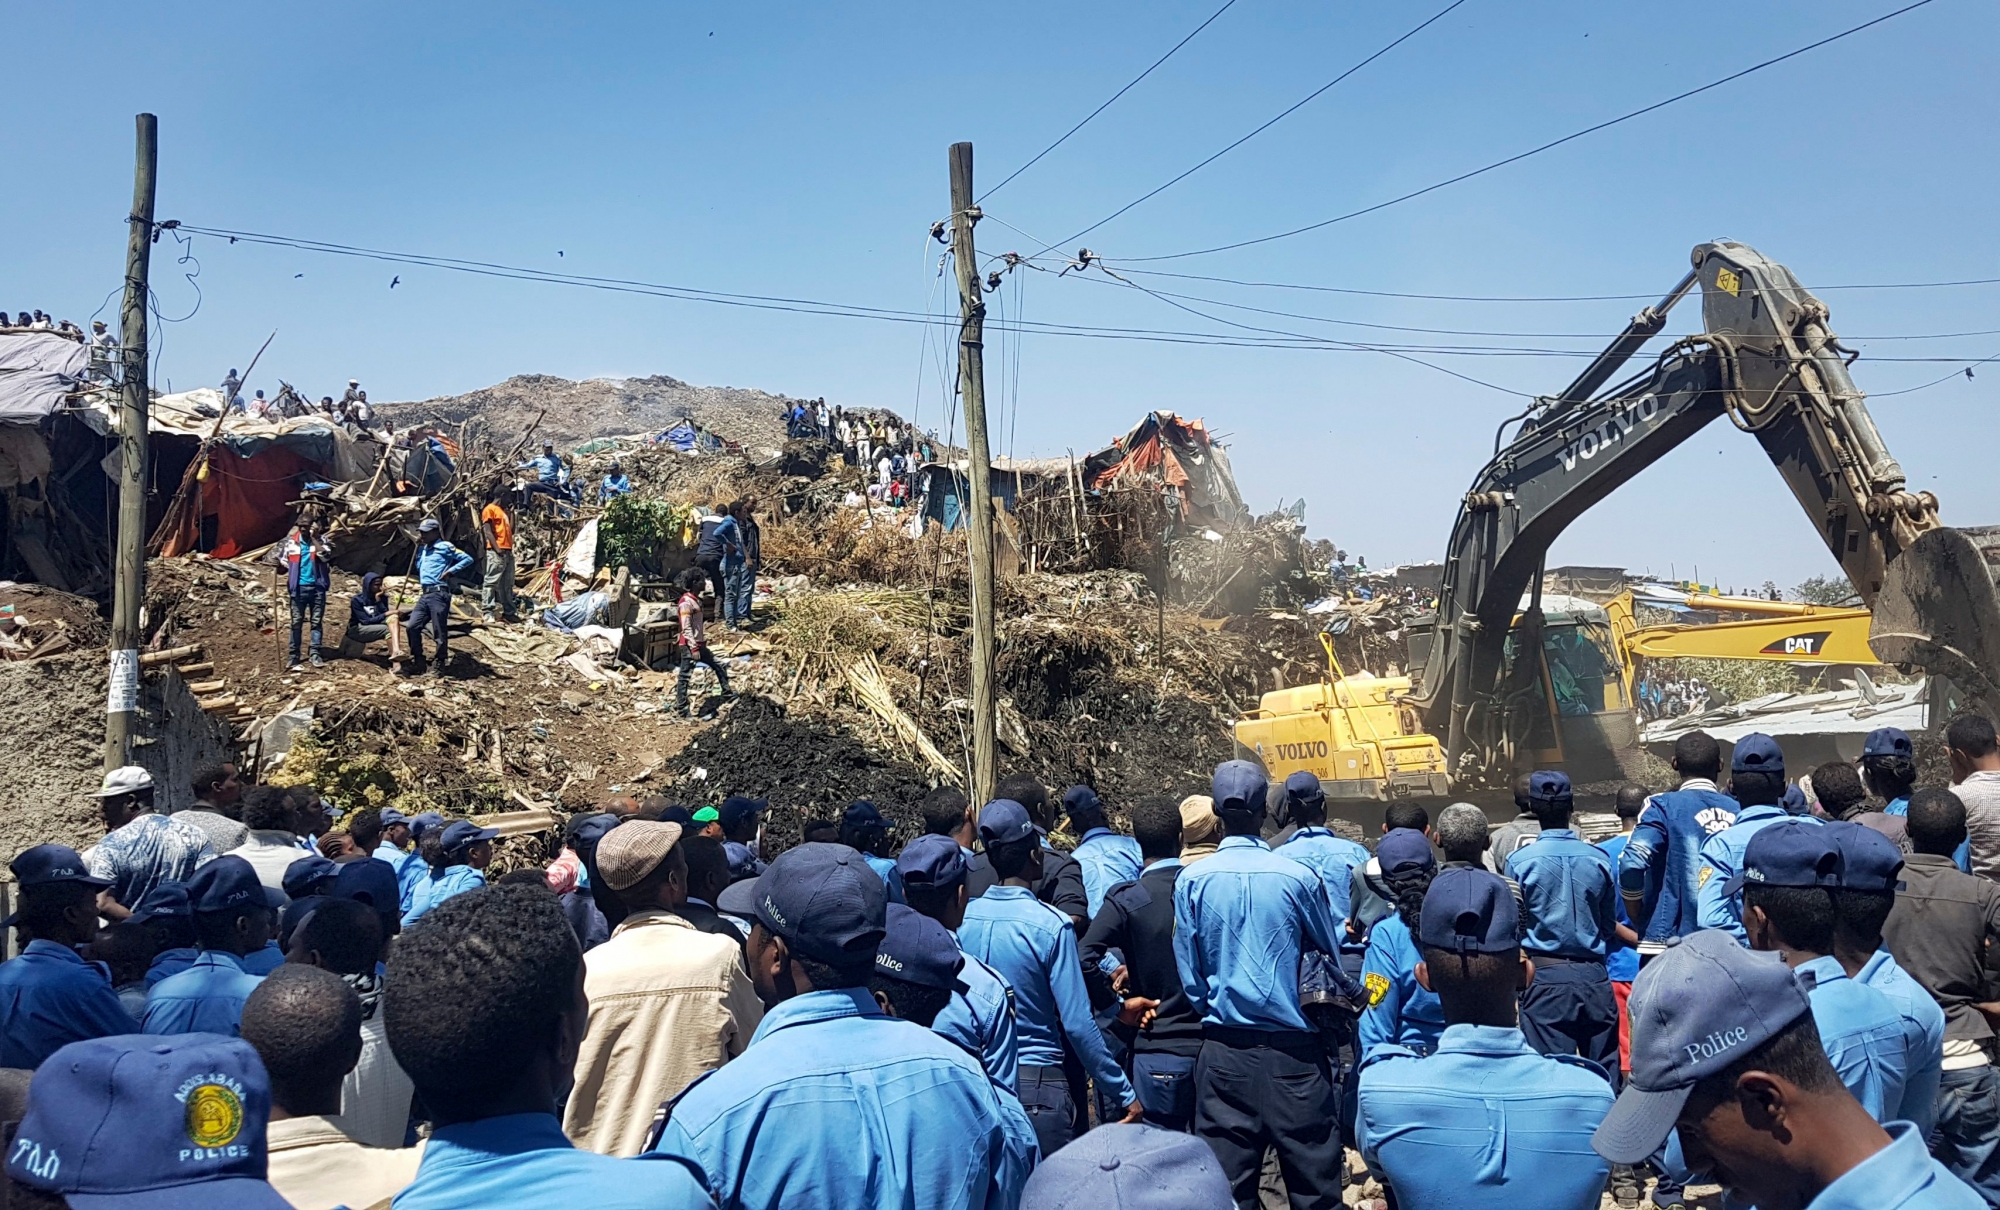 Police officers secure the perimeter at the scene of a garbage landslide, as excavators aid rescue efforts, on the outskirts of the capital Addis Ababa, Ethiopia Sunday, March 12, 2017. Officials and residents say more than a dozen people have been killed in a landslide at a massive garbage dump on the outskirts of Ethiopia's capital, and several dozen people are missing. (AP Photo/Elias Meseret) APTOPIX Ethiopia Deadly Landslide